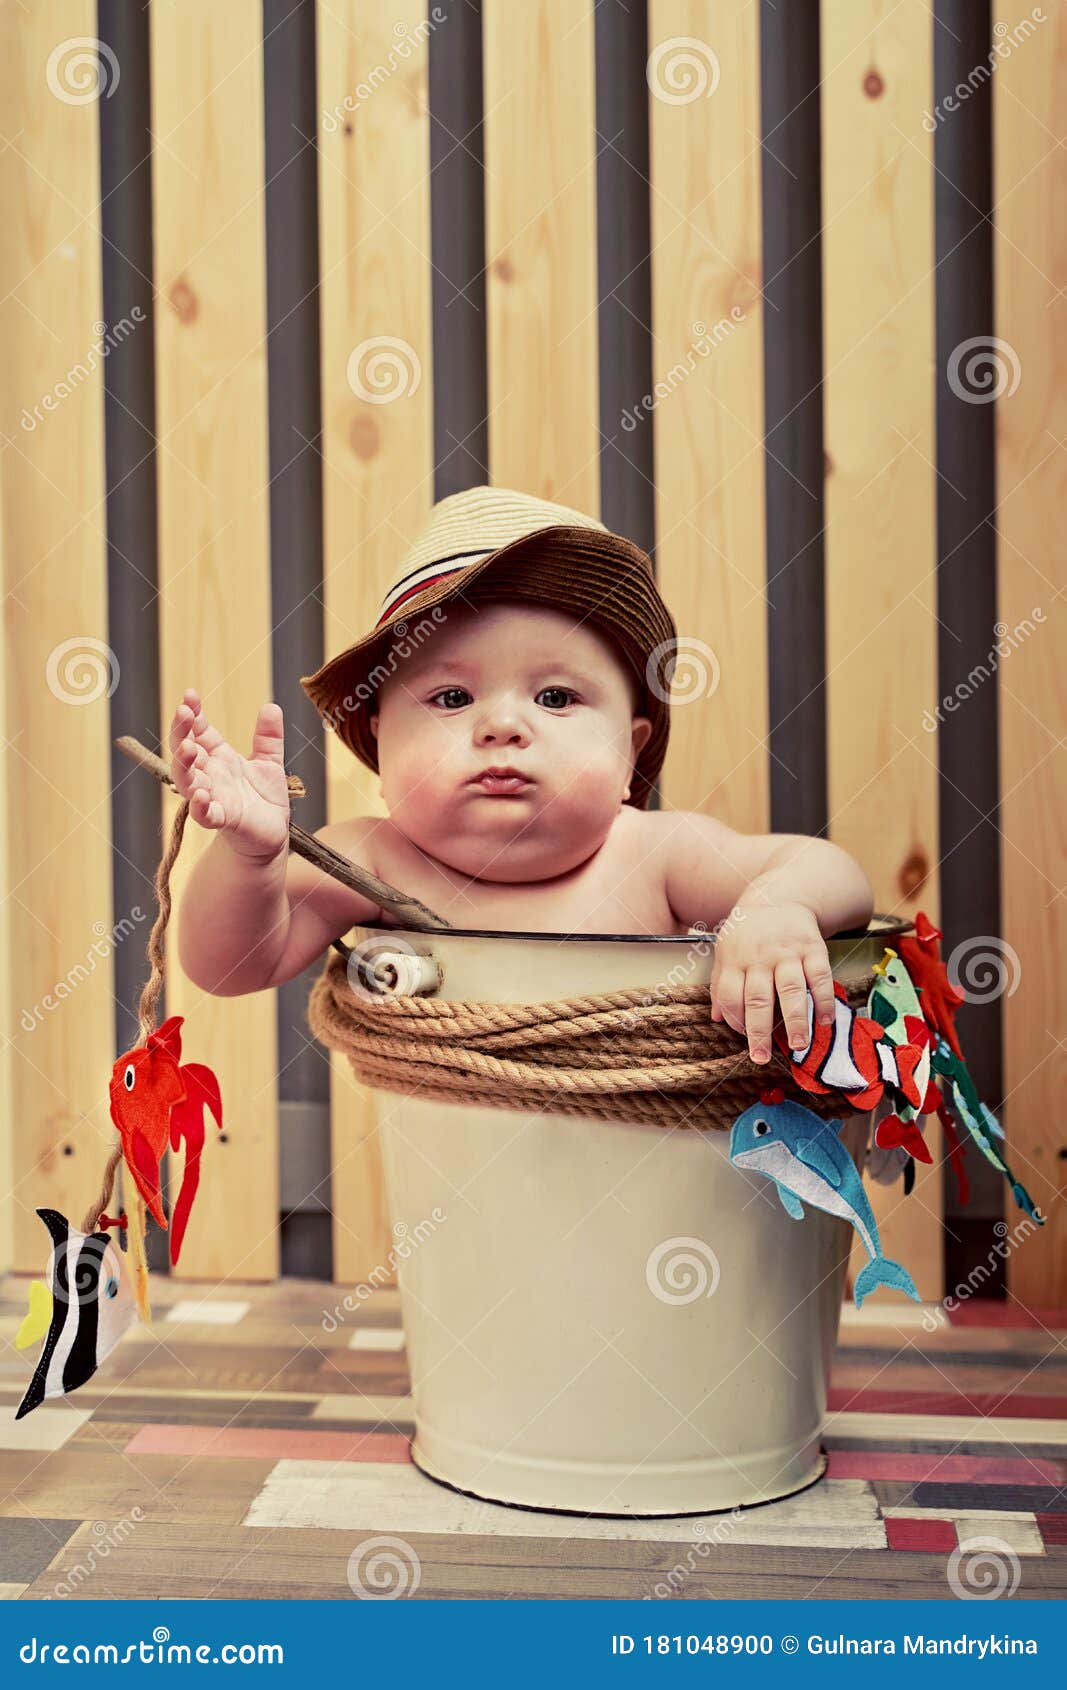 A Small Child in a Straw Hat Sits in a Bucket with a Fishing Rod